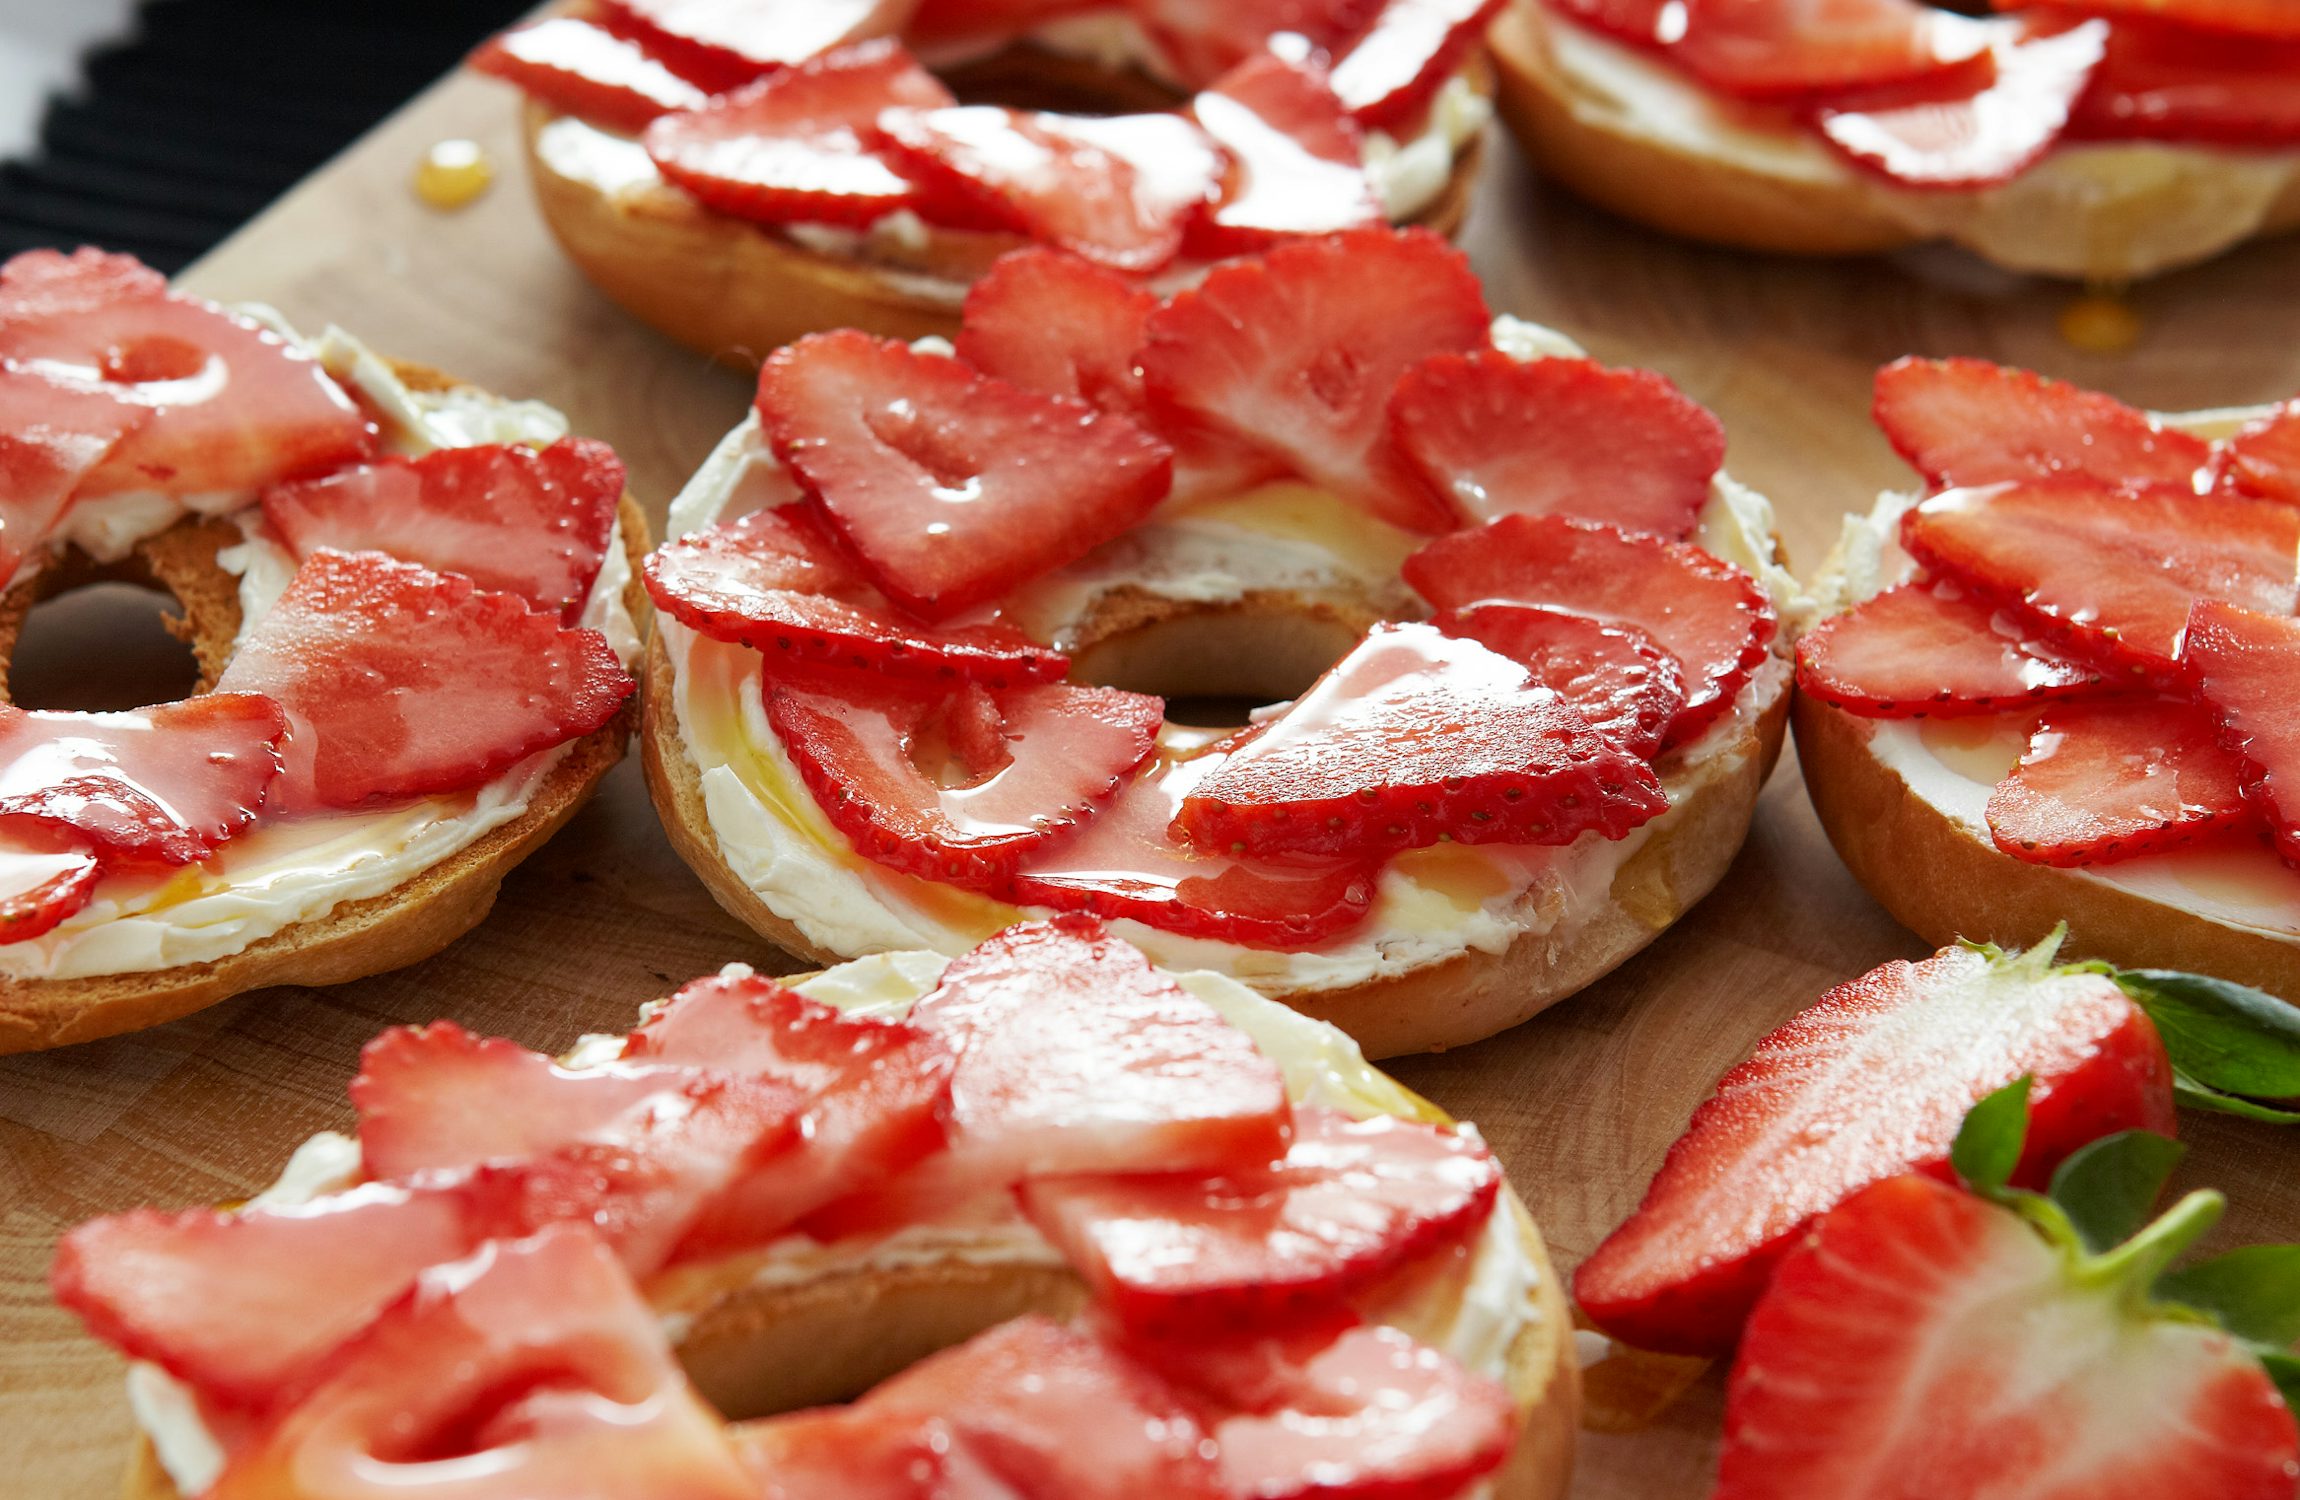 Toasted Bagels with Strawberries, Honey & Cream Cheese